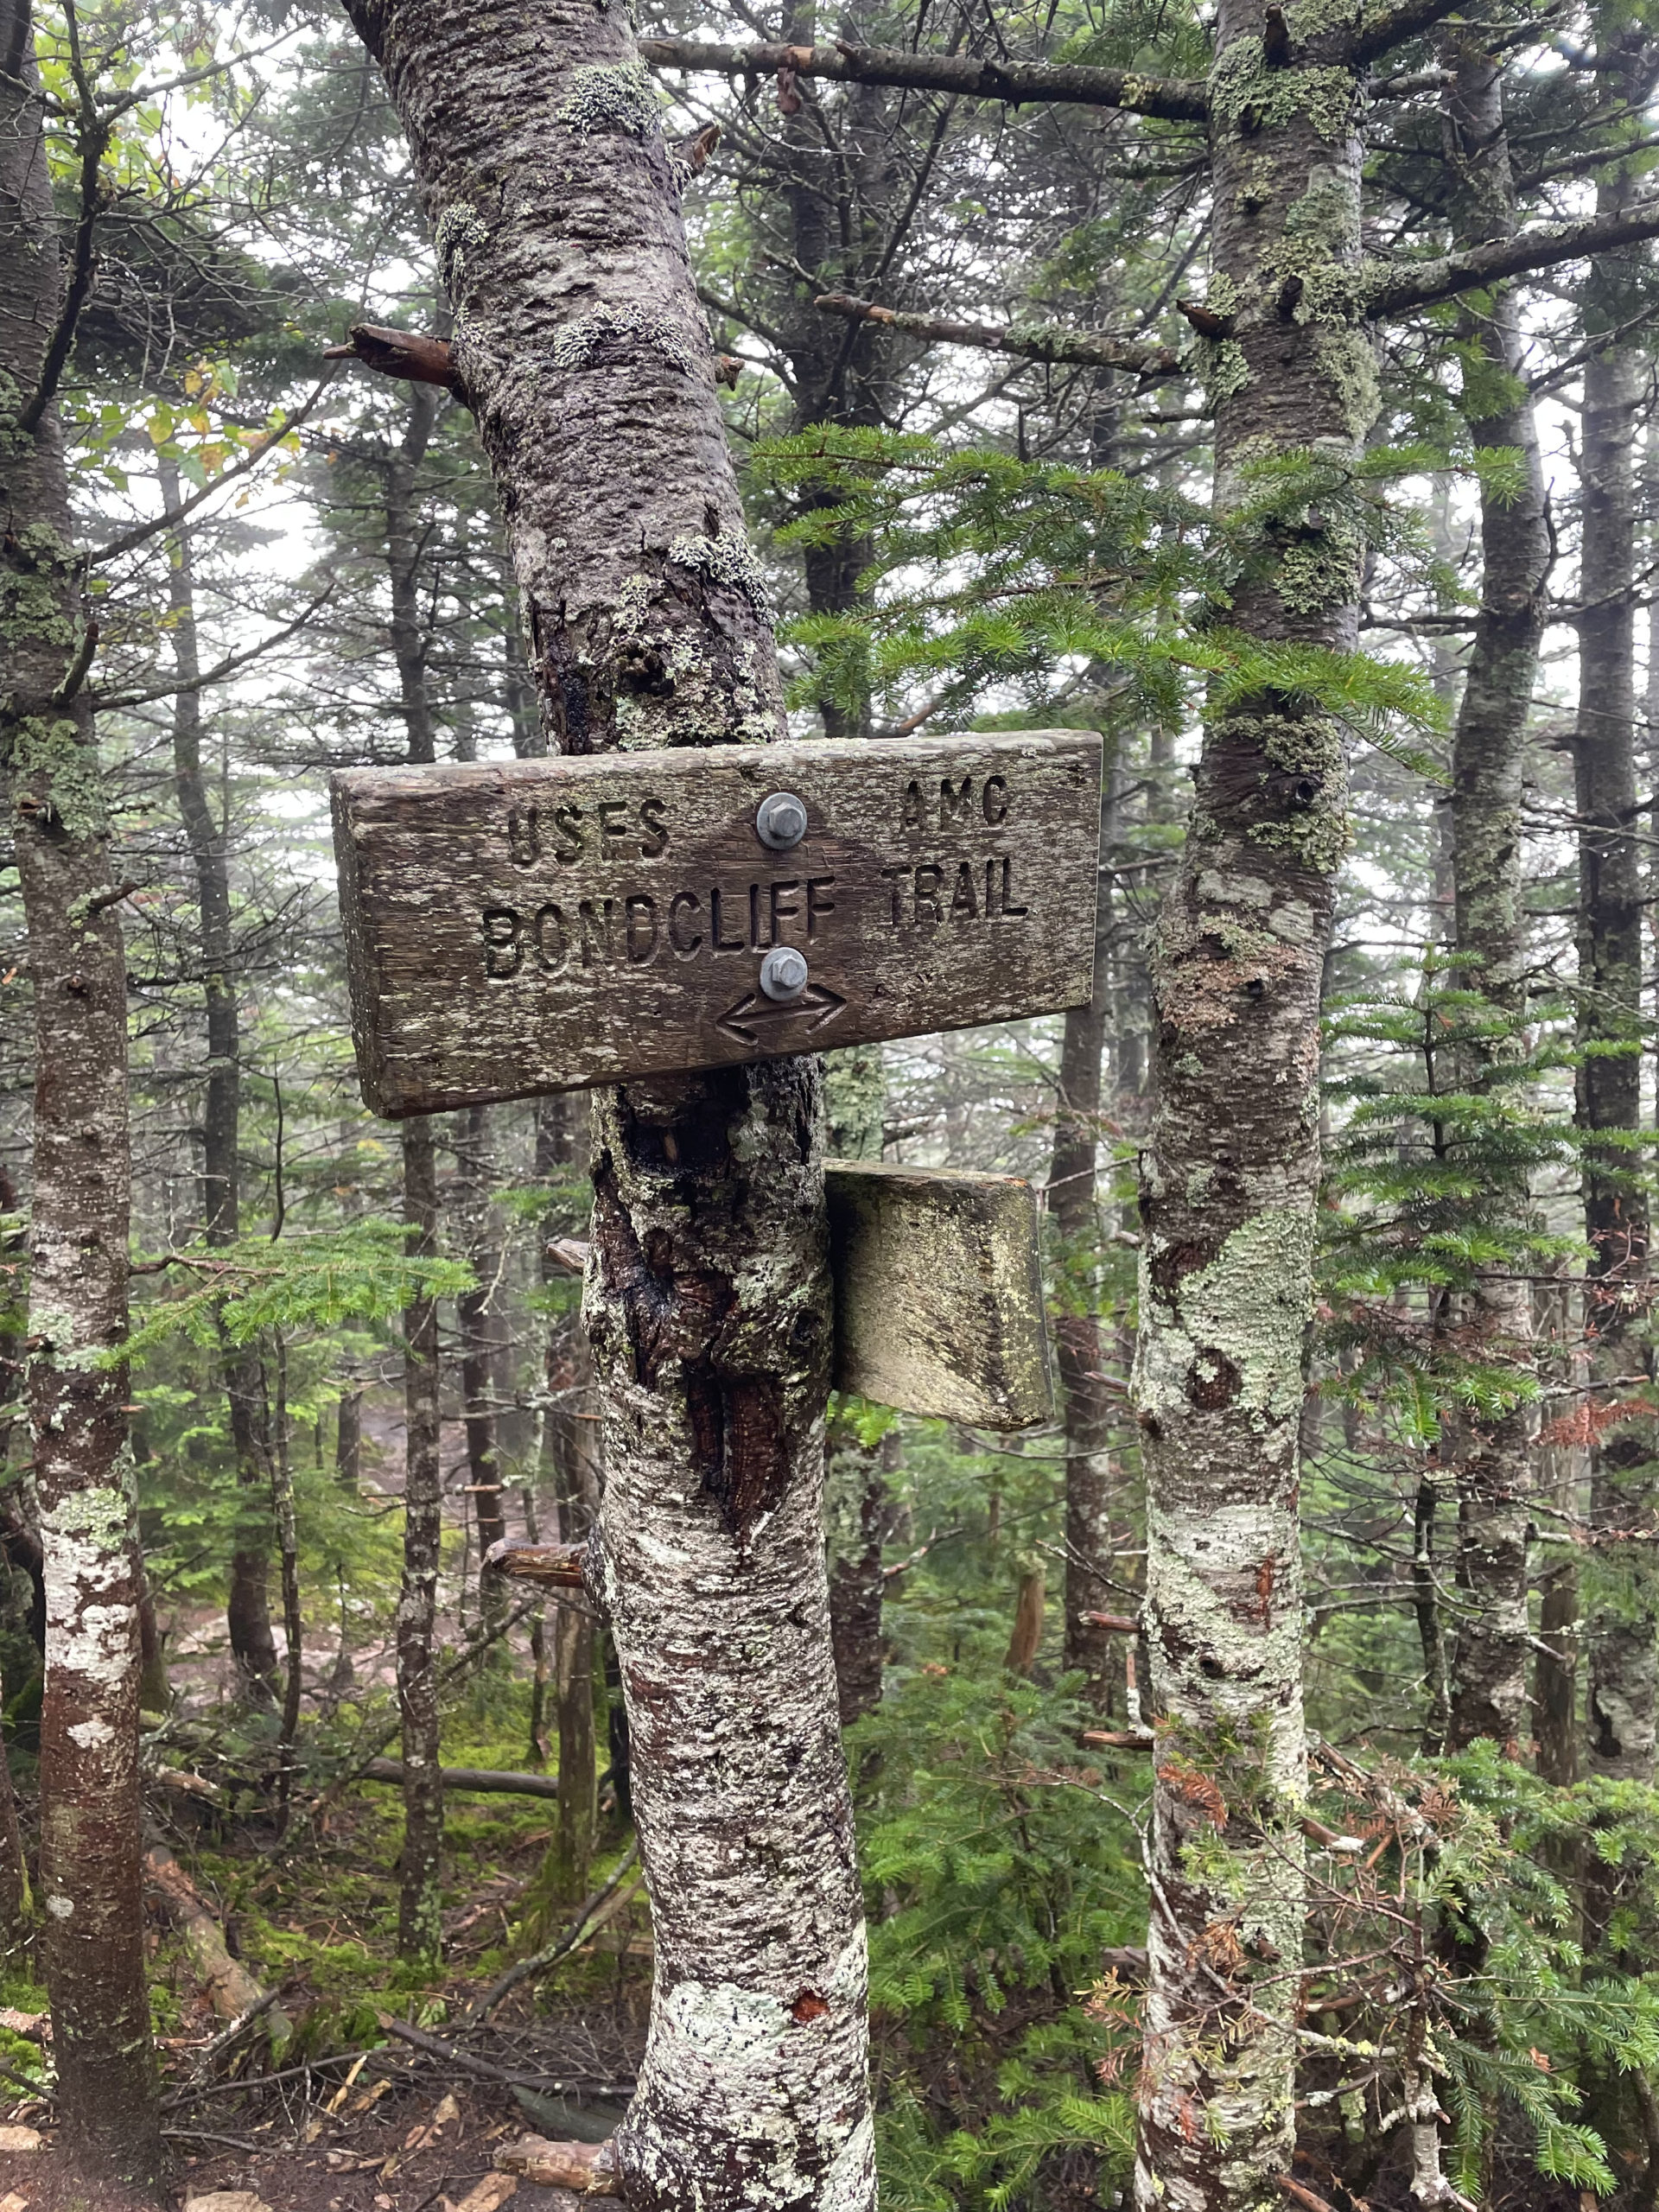 Trail sign, seen while hiking West Bond, Mt Bond, and Bondcliff in the White Mountains National Forest, New Hampshire